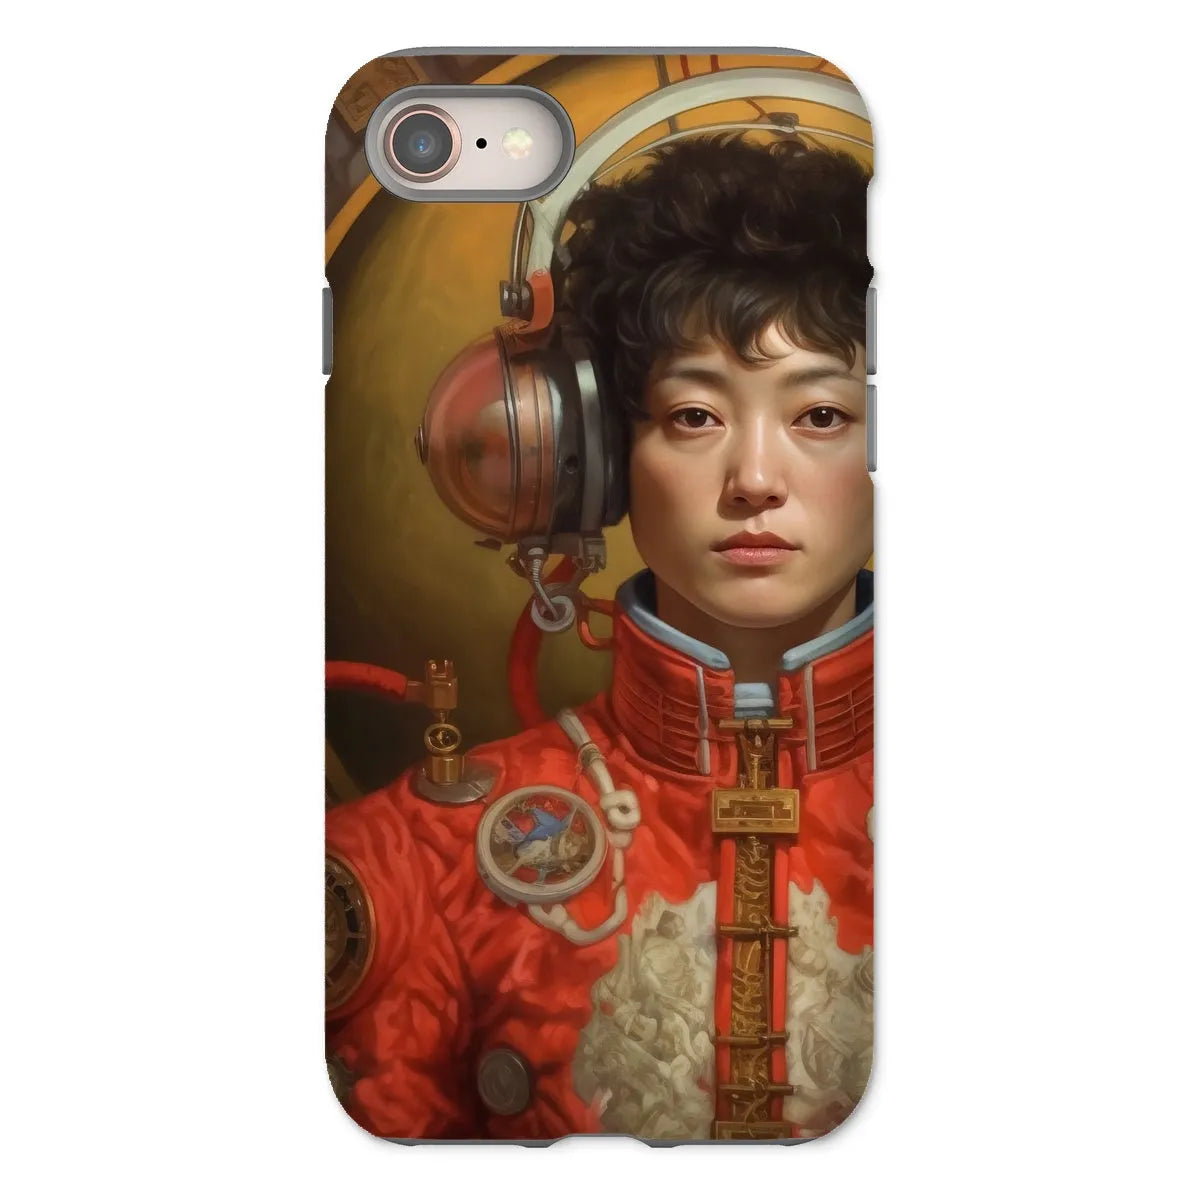 Mùchén - Gay Chinese Astronaut Aesthetic Phone Case - Iphone 8 / Matte - Mobile Phone Cases - Aesthetic Art